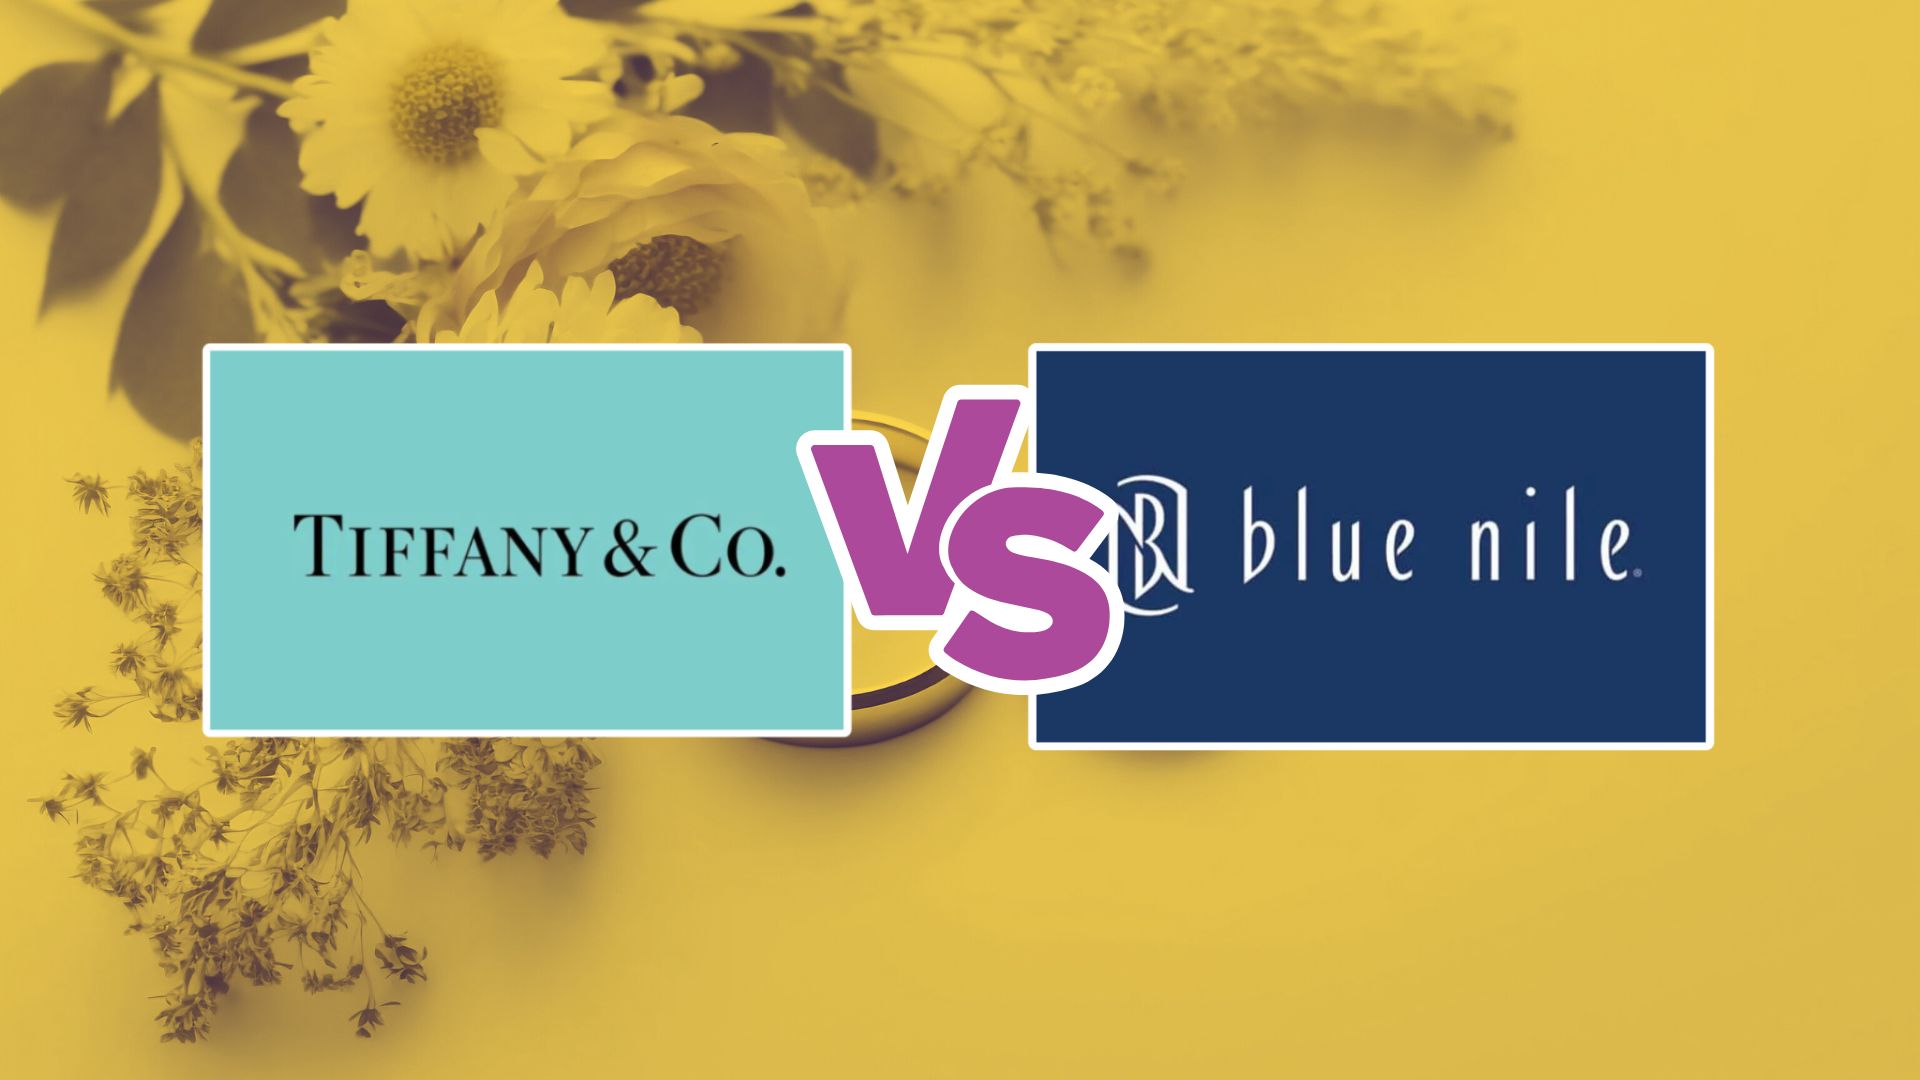 Guide on Blue Nile Quality vs Tiffany - Which Retailer is Better?